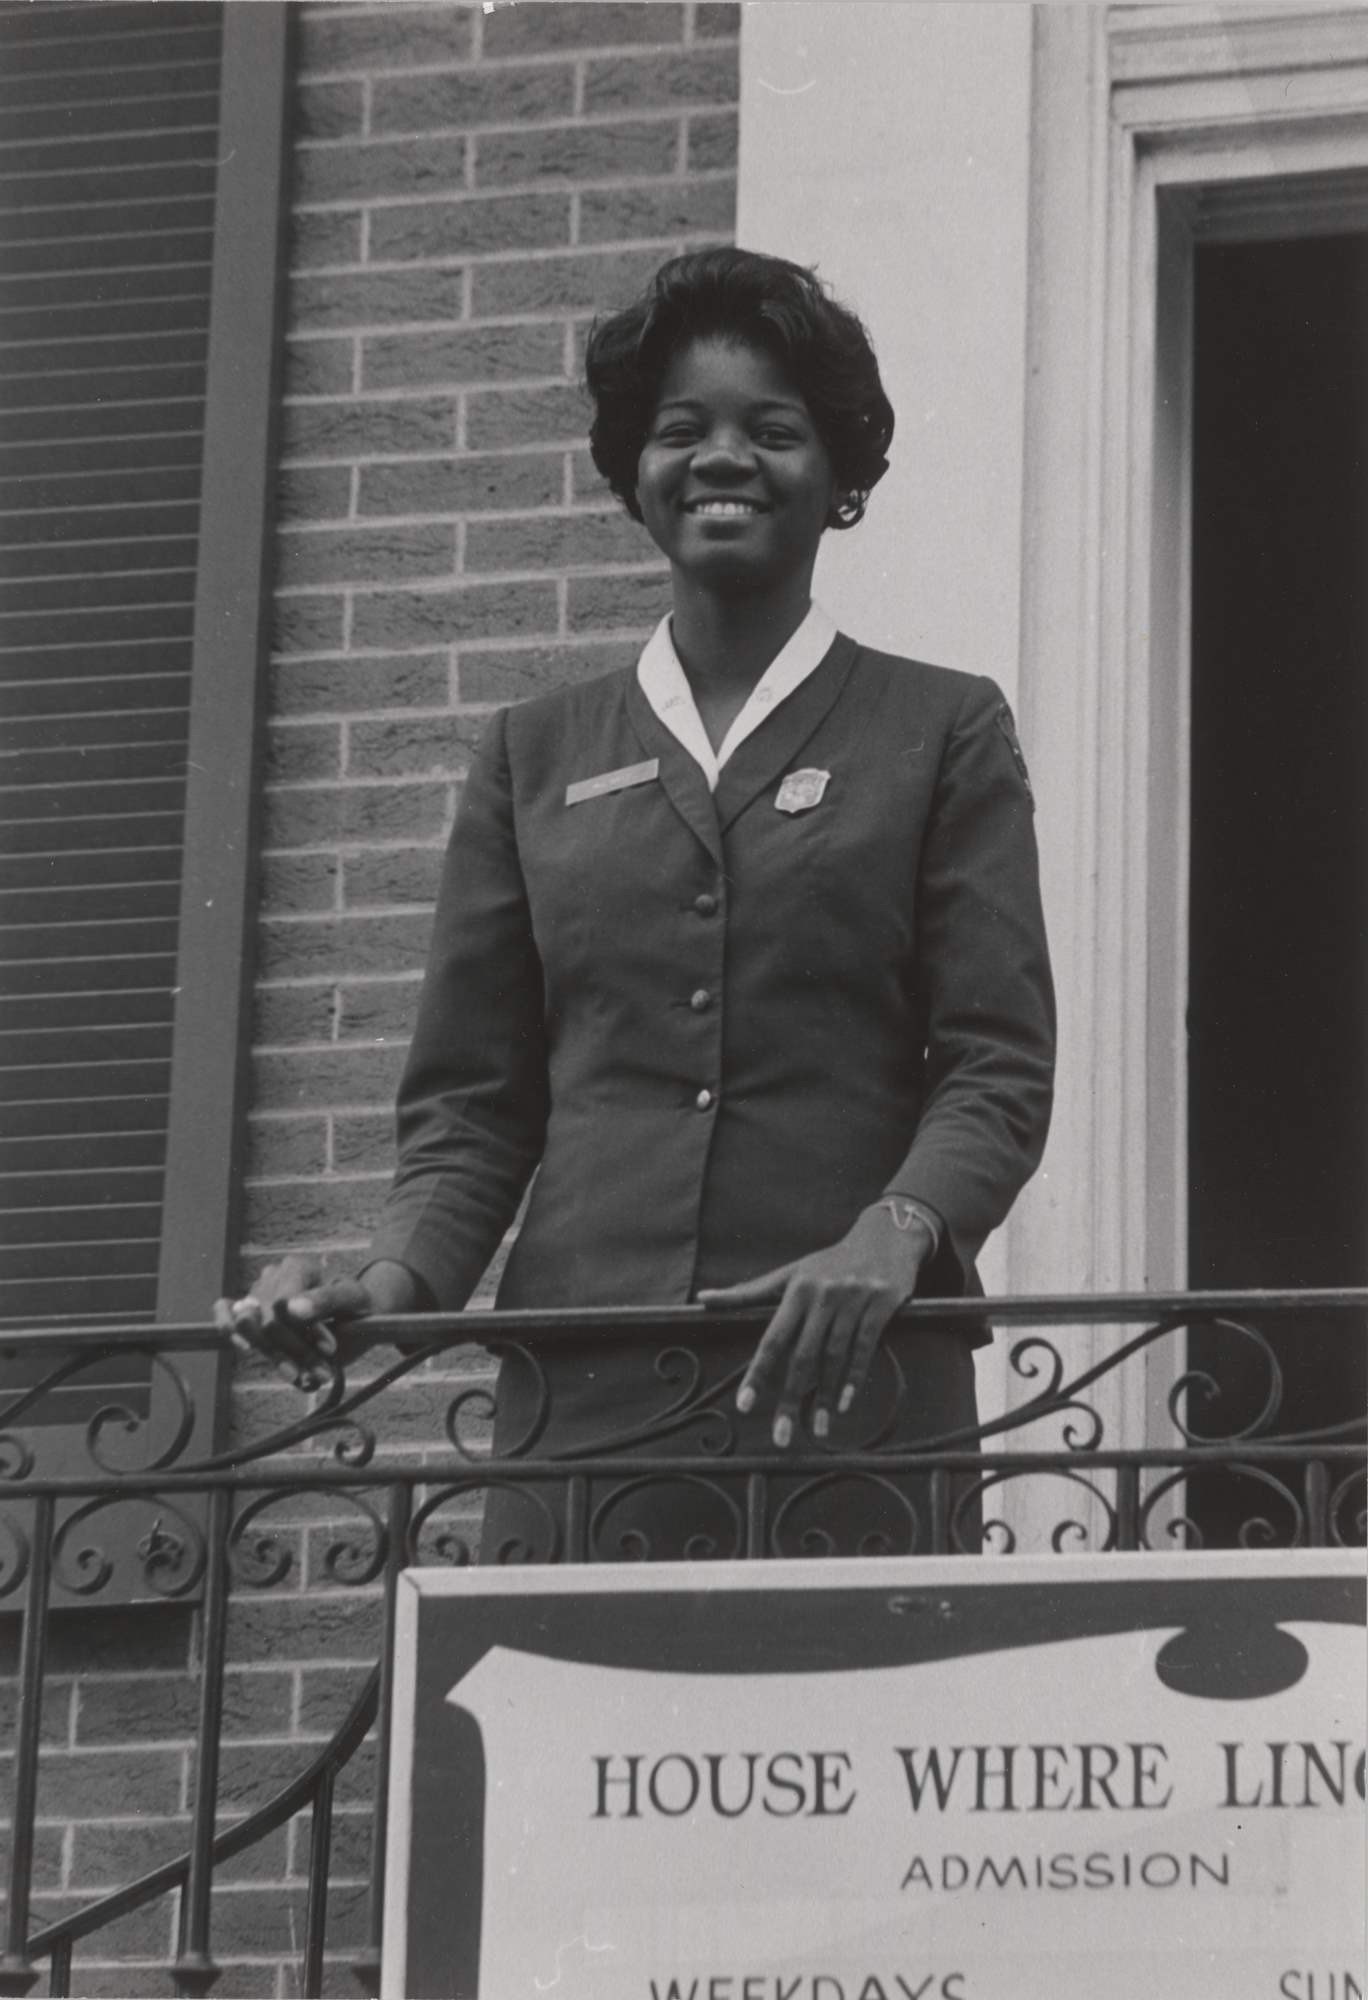 Miss Rolle stands smiling at a railing on top of steps. She wears the NPS women’s uniform skirt, blouse, and jacket with shield-shaped badge.